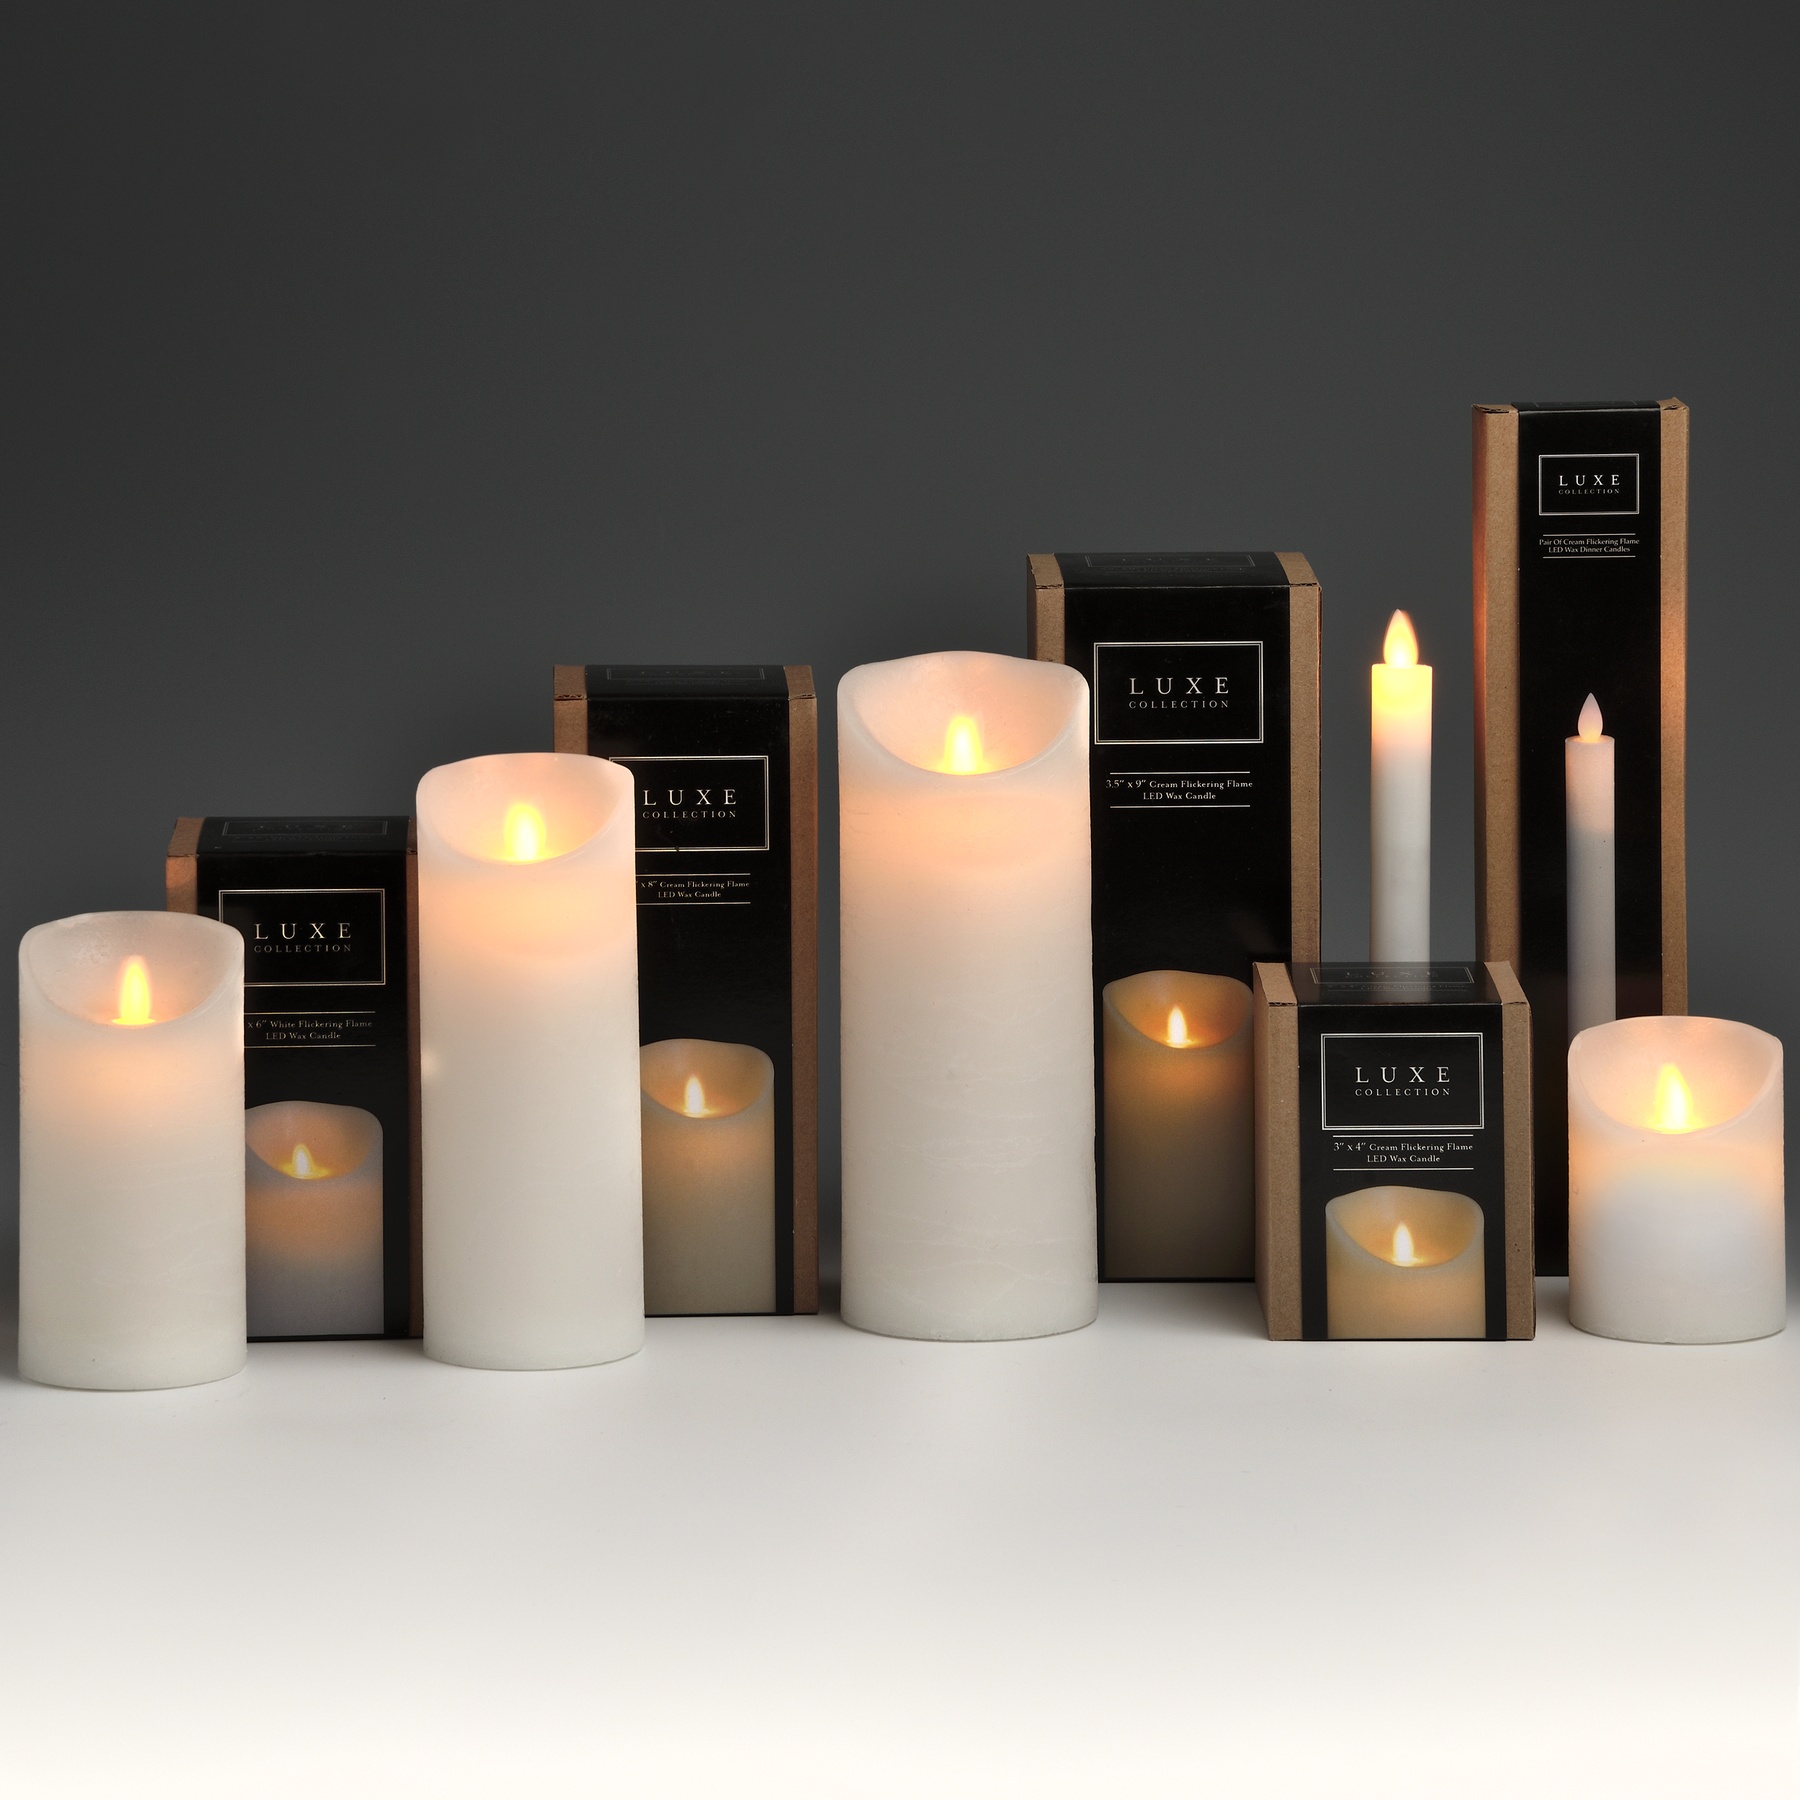 Luxe Collection 3 x 6 White Flickering Flame LED Wax Candle - Image 4